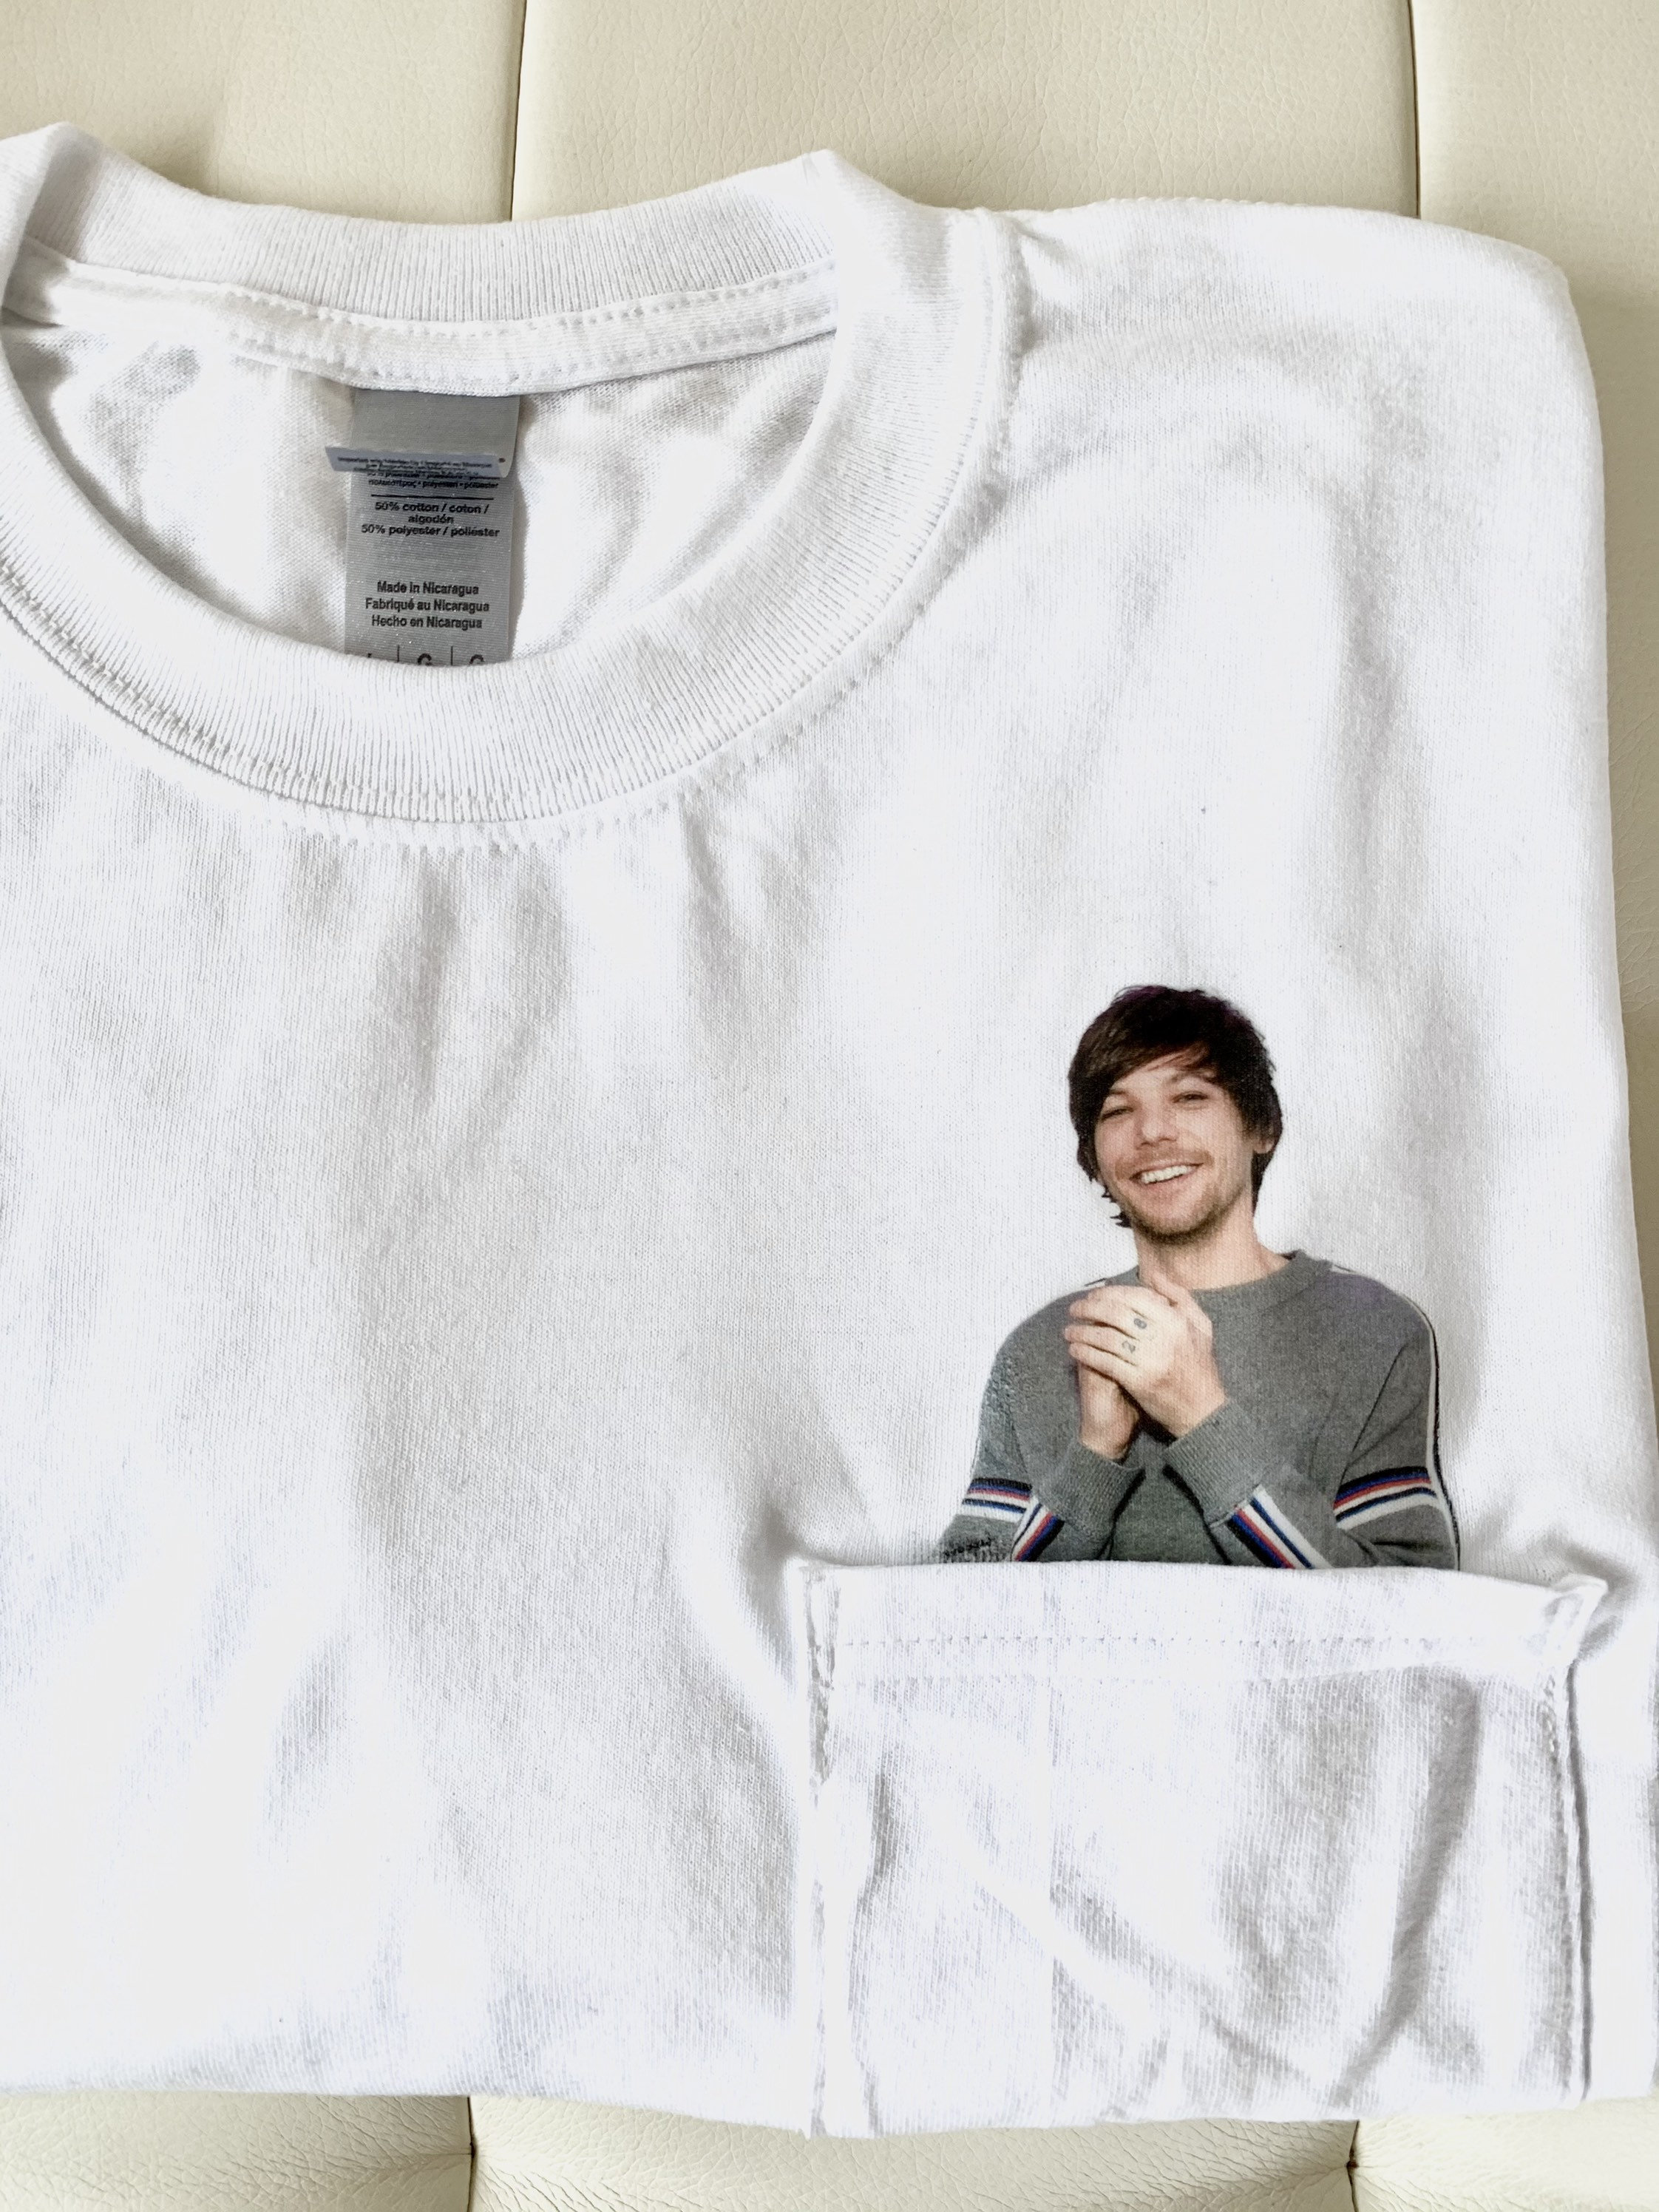 Buy I Love Louis Tomlinson T-shirt I Heart Louis Tomlinson Tee Online in  India 